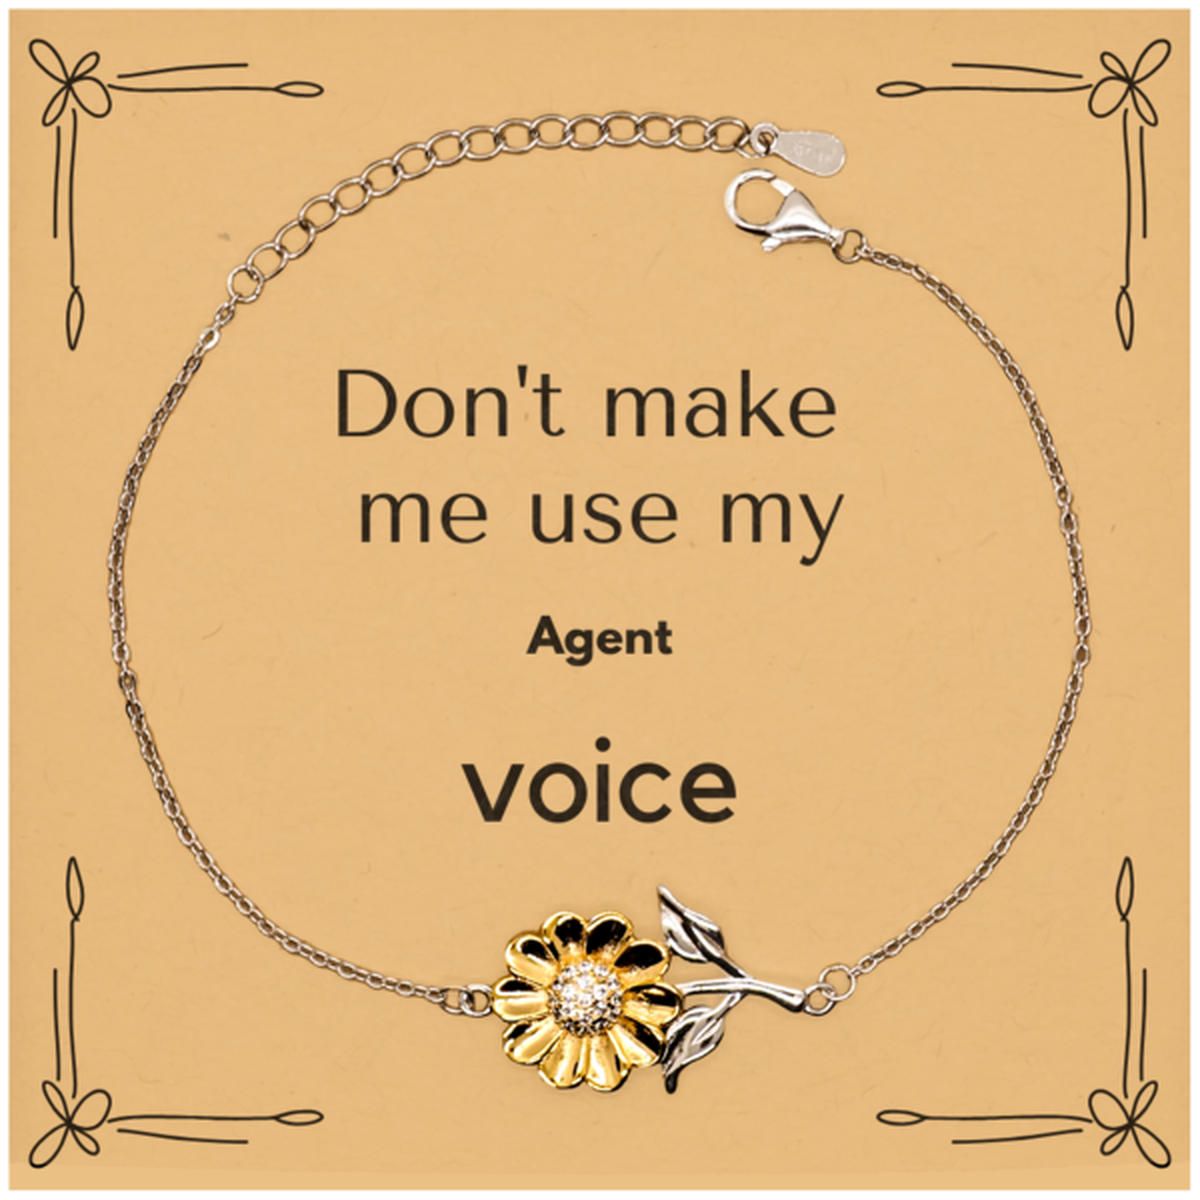 Don't make me use my Agent voice, Sarcasm Agent Card Gifts, Christmas Agent Sunflower Bracelet Birthday Unique Gifts For Agent Coworkers, Men, Women, Colleague, Friends